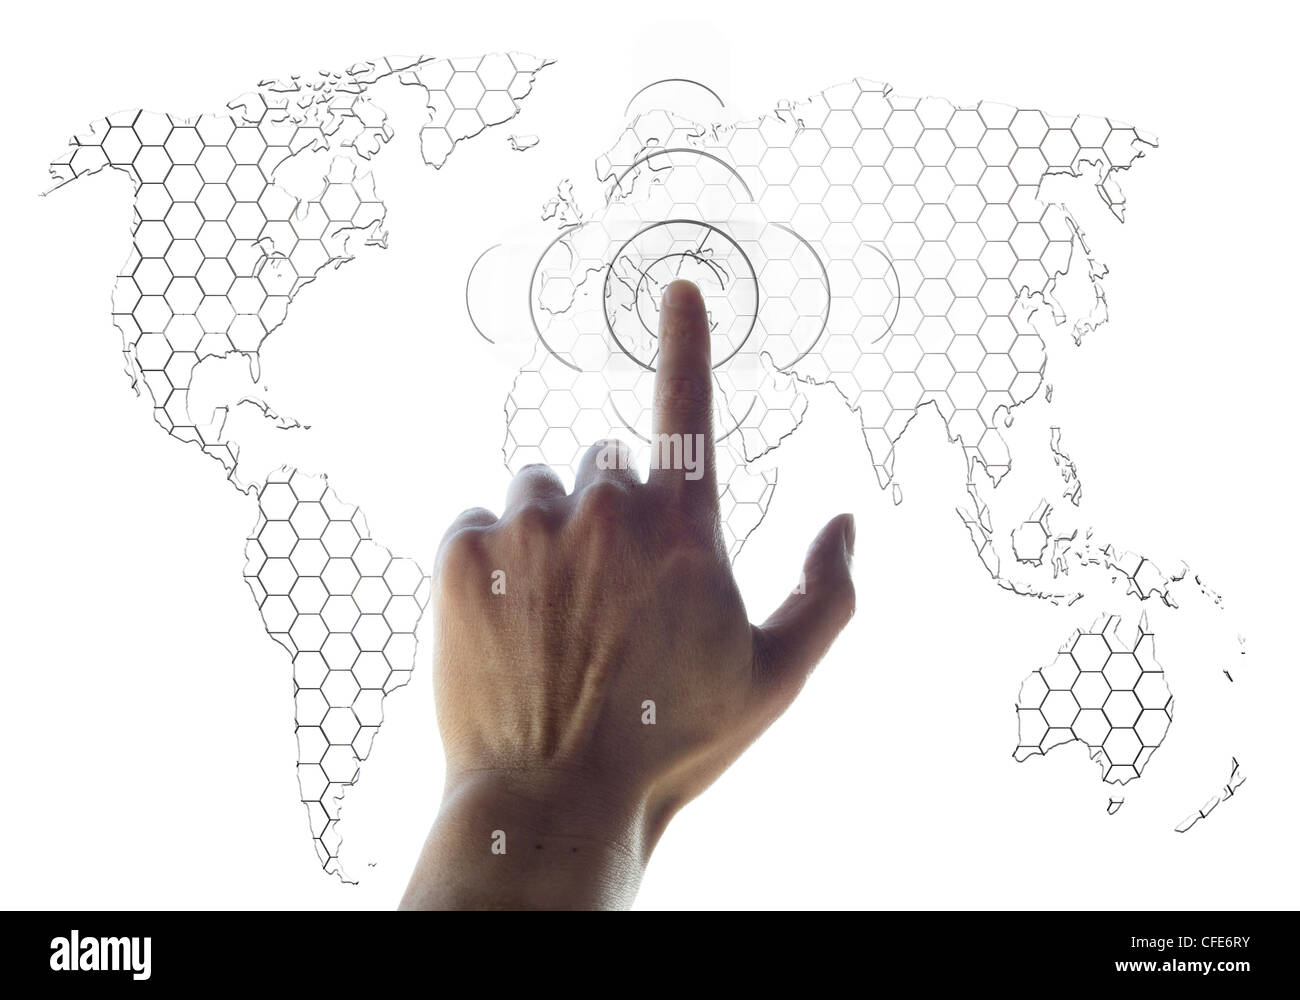 hand and world map digital searching concept Stock Photo